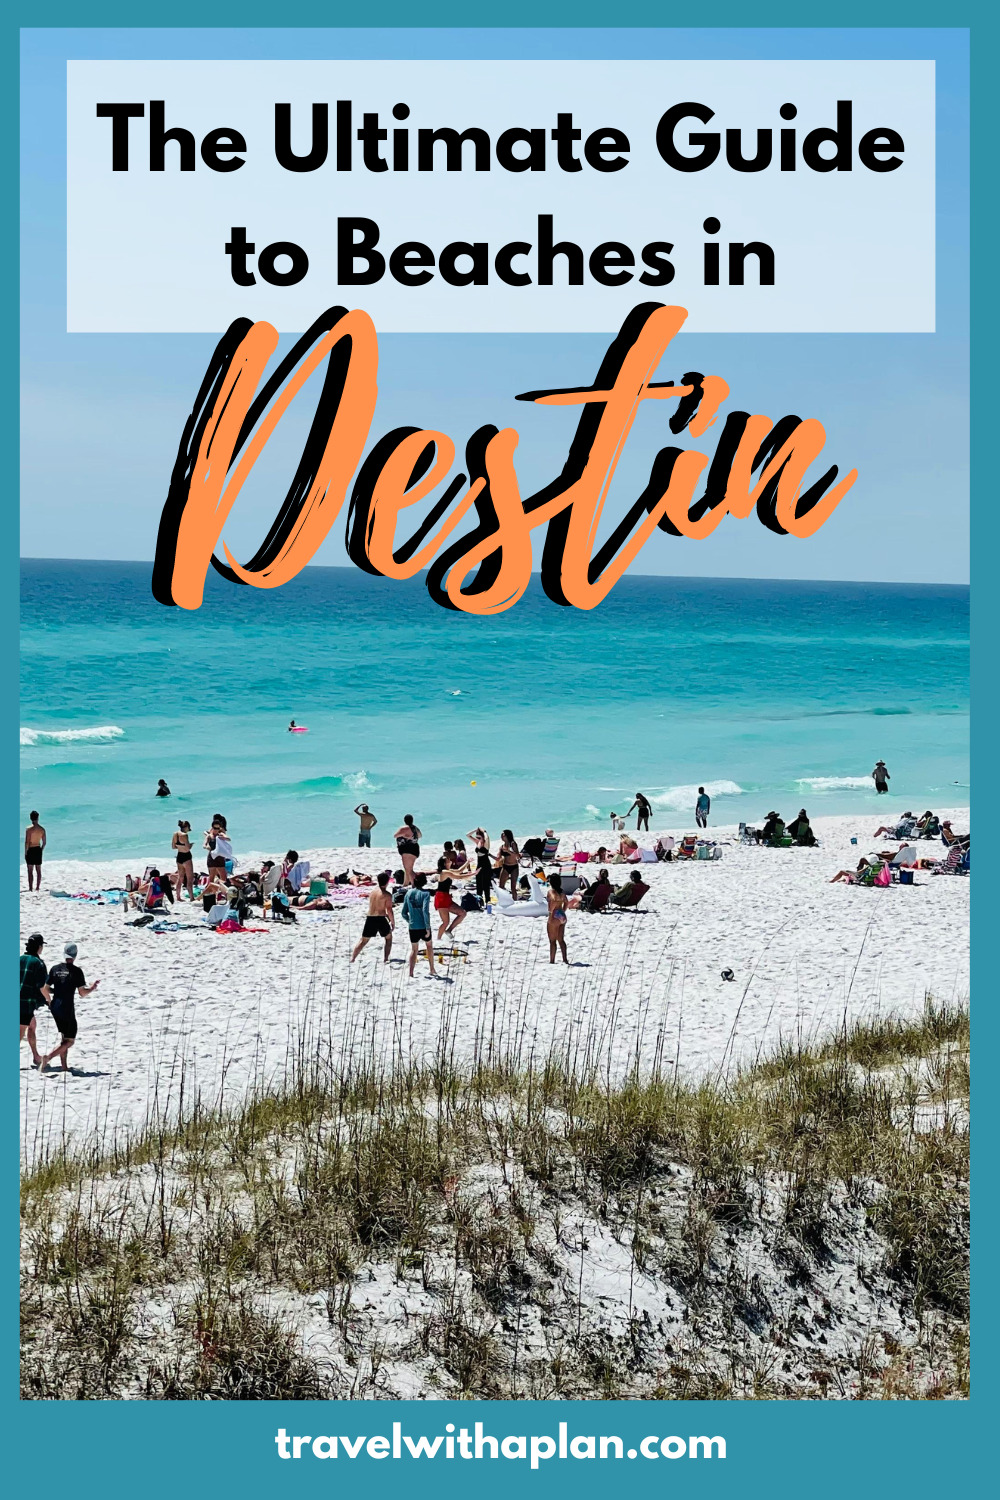 Find out the best beaches in Destin, Florida from top US family travel blog, Travel With A Plan!